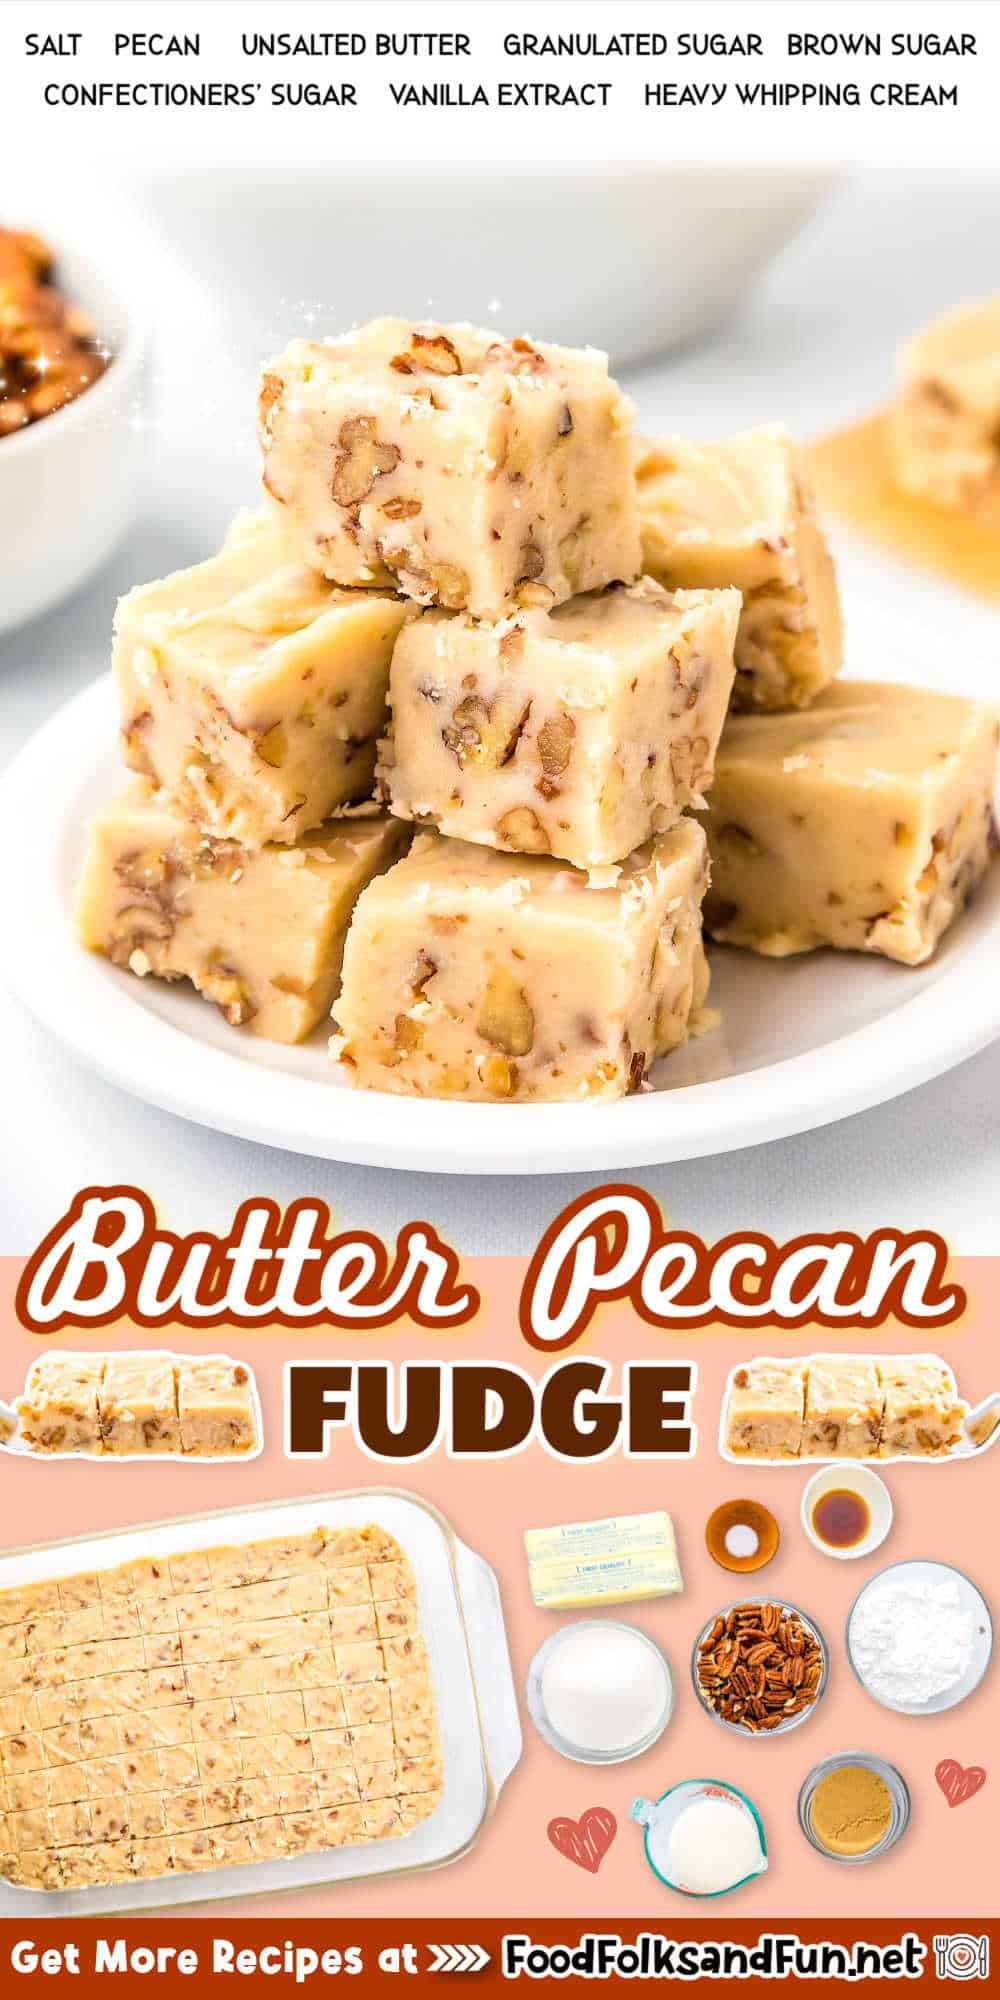 Give this Butter Pecan Fudge as a gift, and people will rave about it! This fudge is so creamy and buttery, and the toasted pecans add great texture. via @foodfolksandfun